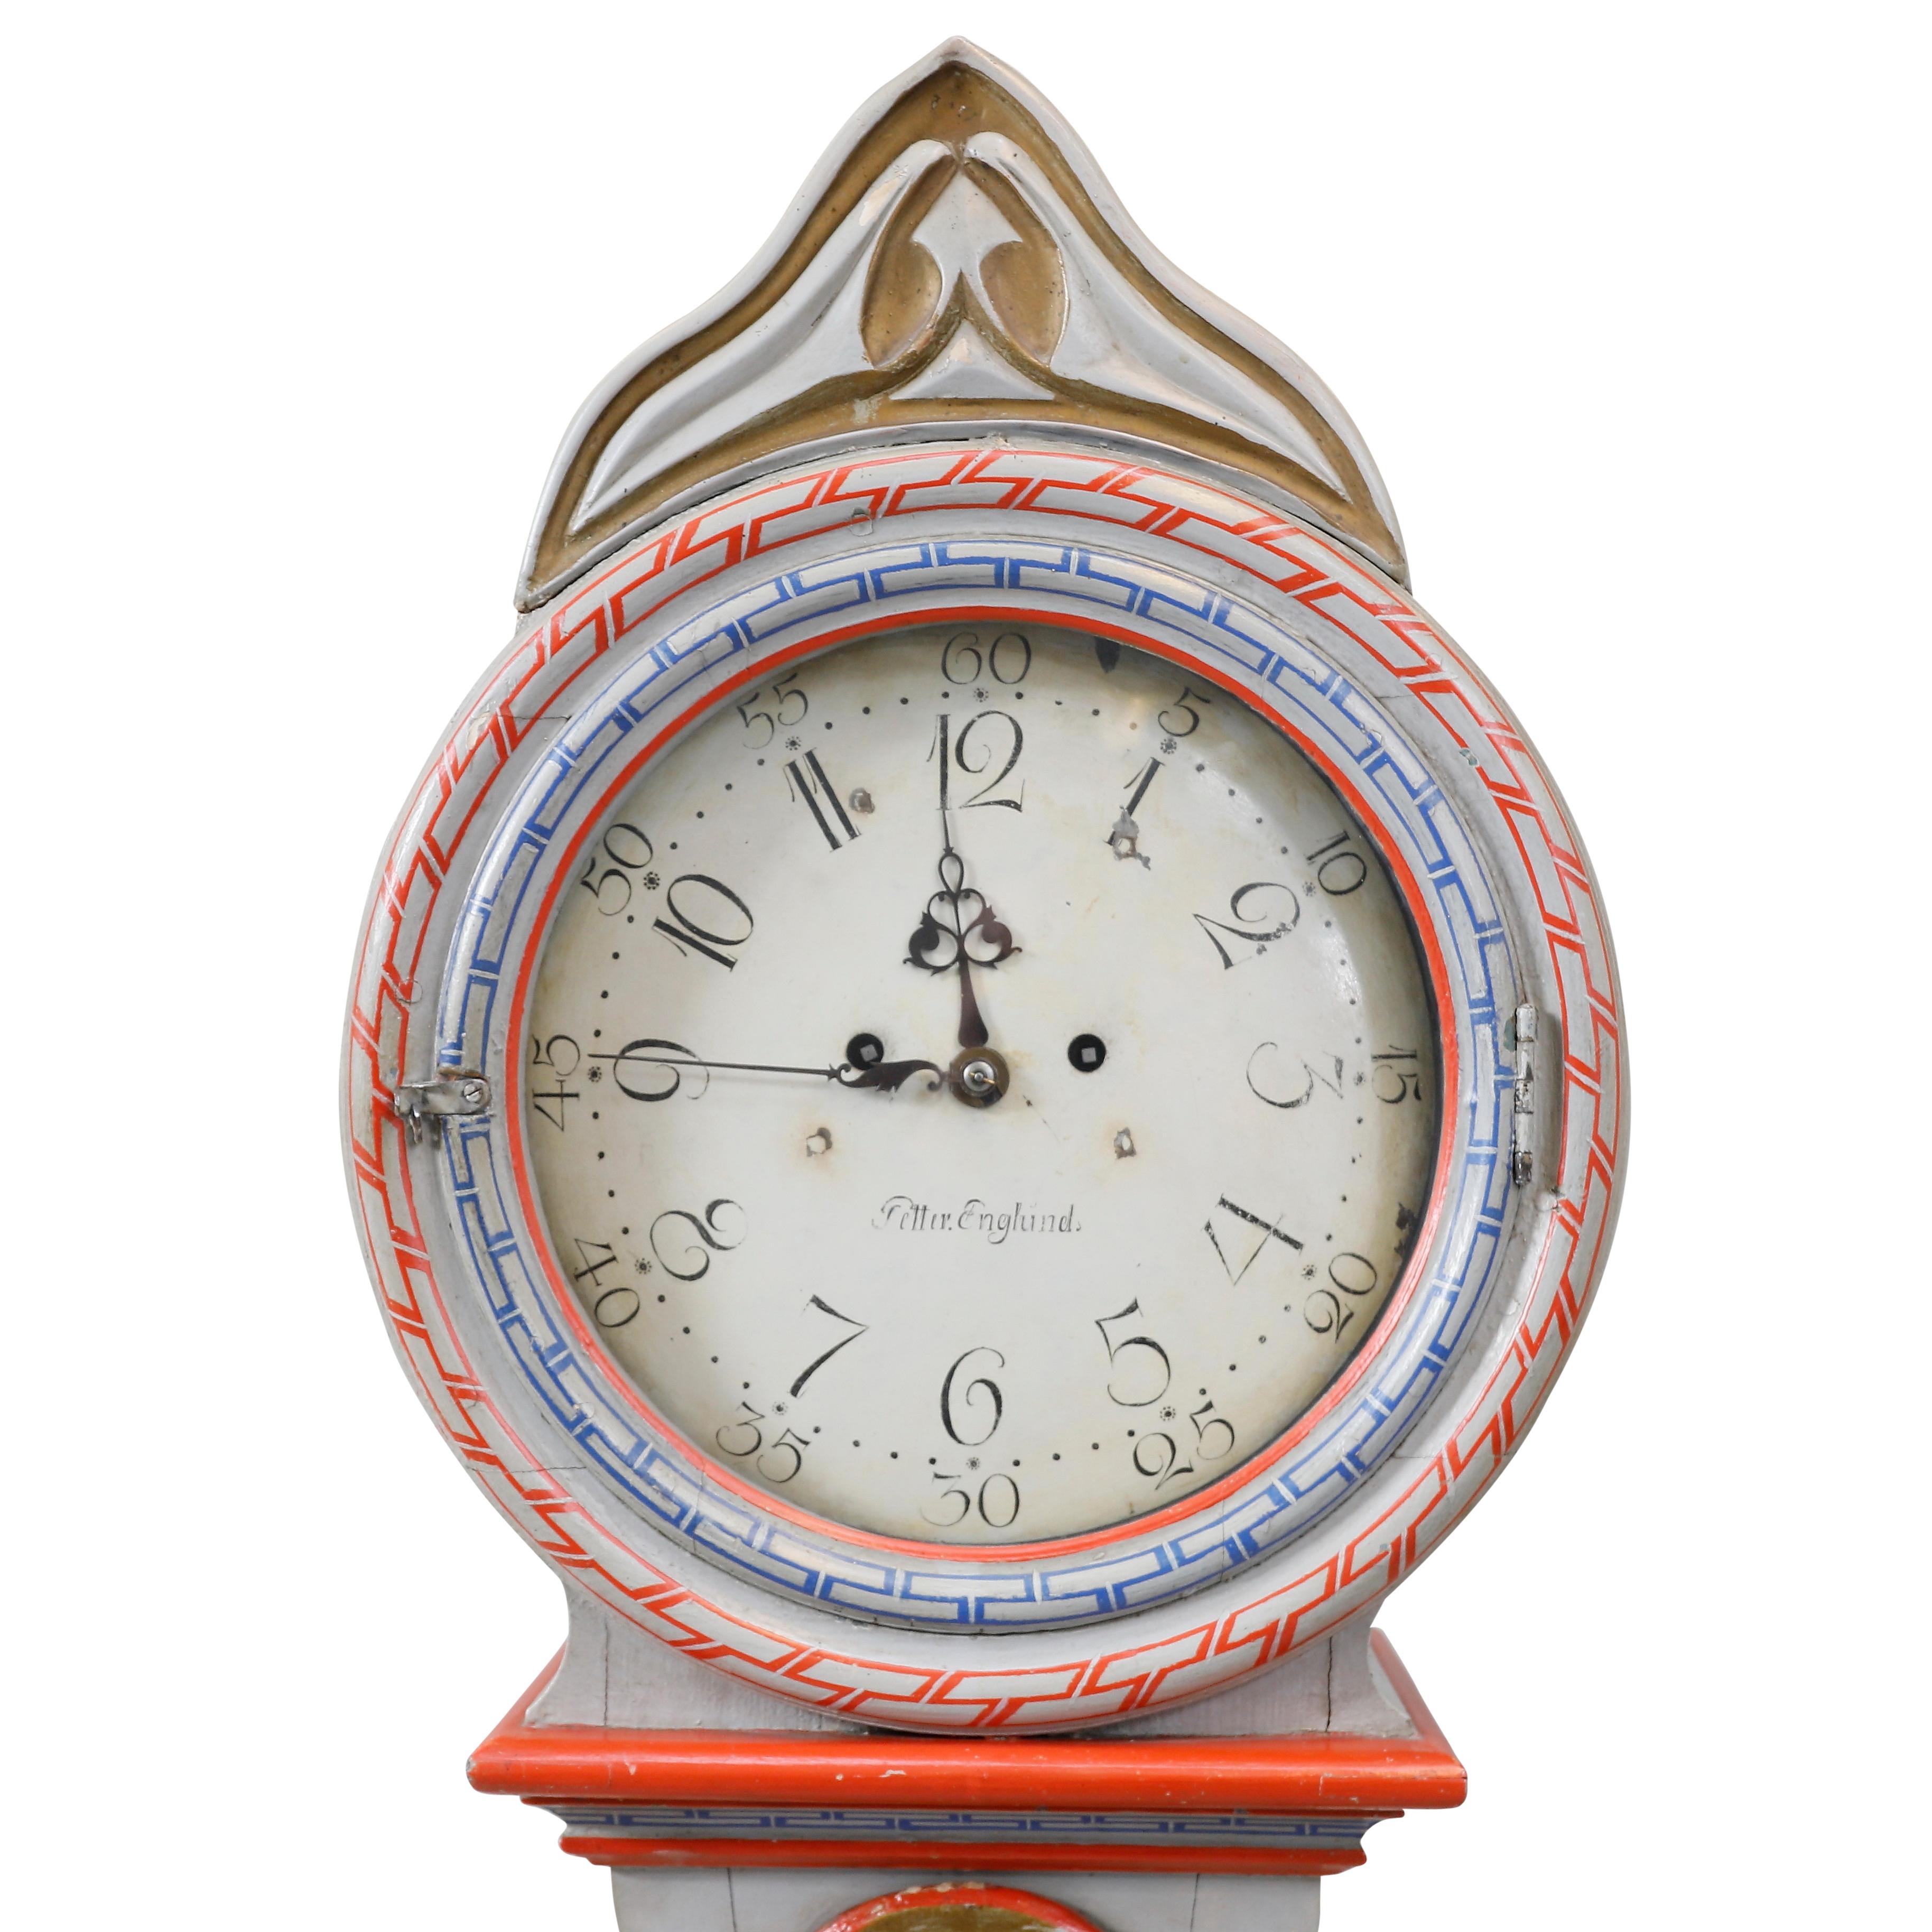 Antique Swedish Mora clock from the 18th Century with Chinoiserie hand painted details. The dial of this clock carries the name of its maker 'Peter Englund'. 

Width: 58.5cm / 23